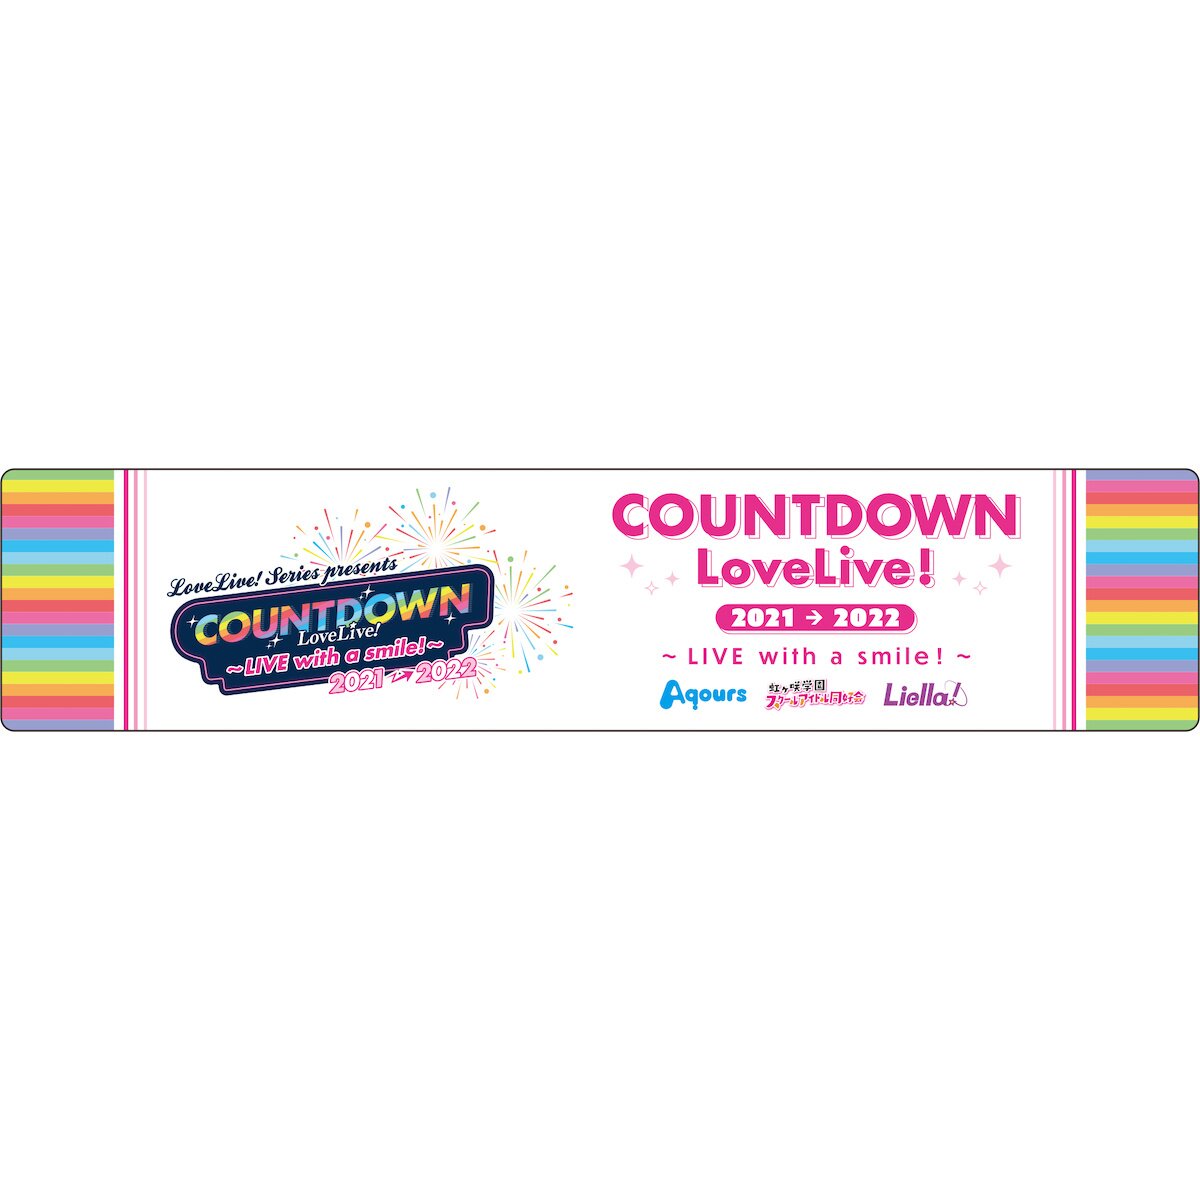 Love Live! Series Presents COUNTDOWN LoveLive! 2021→2022 〜LIVE 